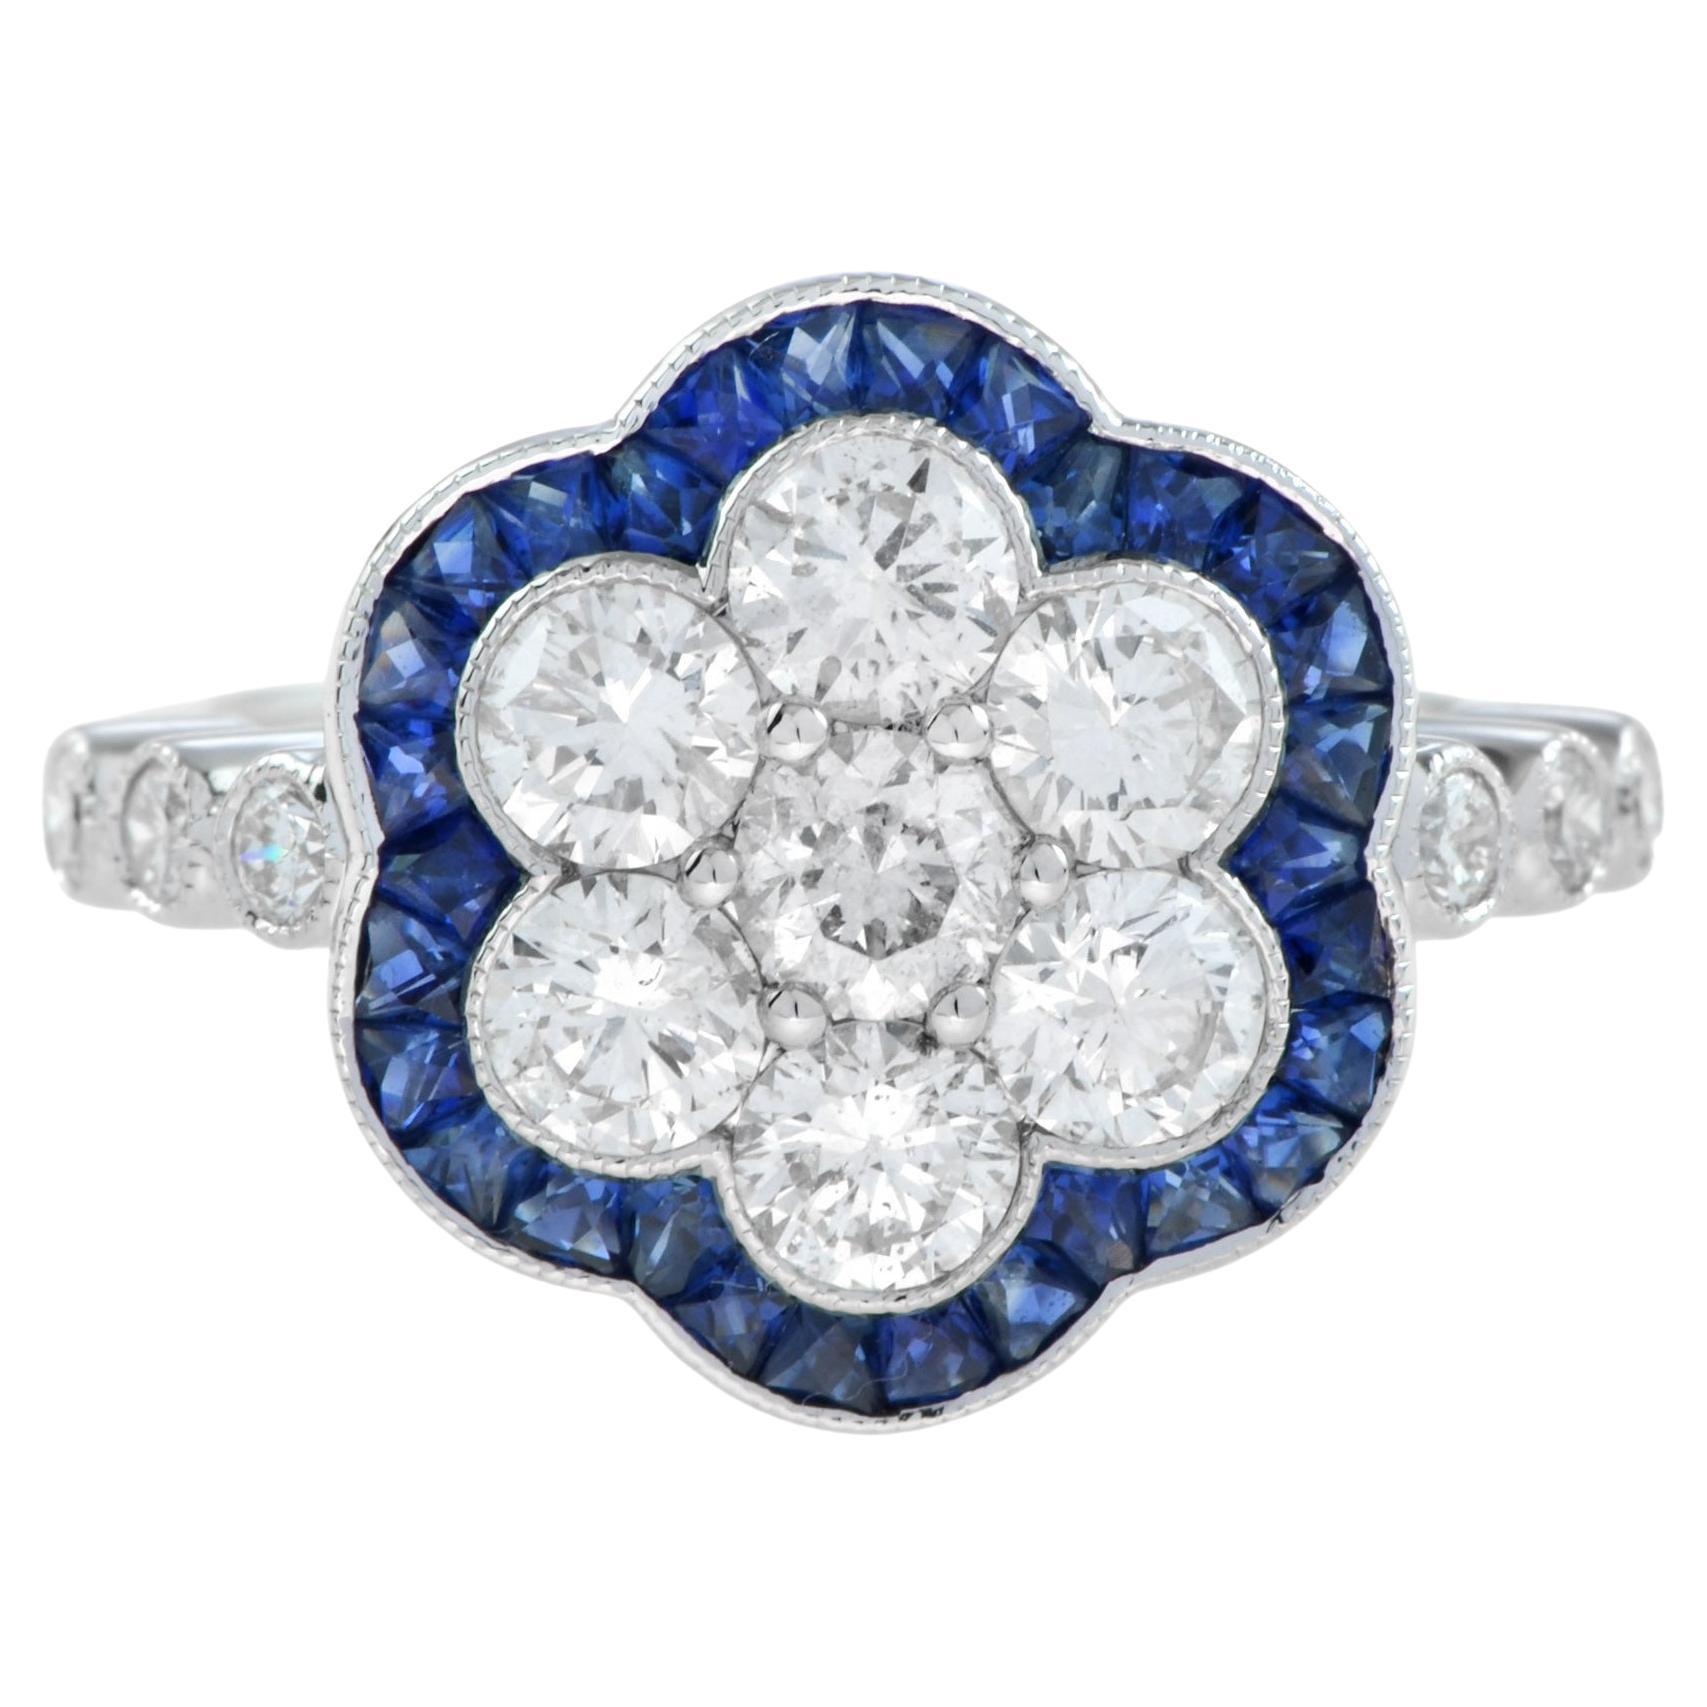 Art Deco Style Diamond and Sapphire Cluster Ring in 18K White Gold